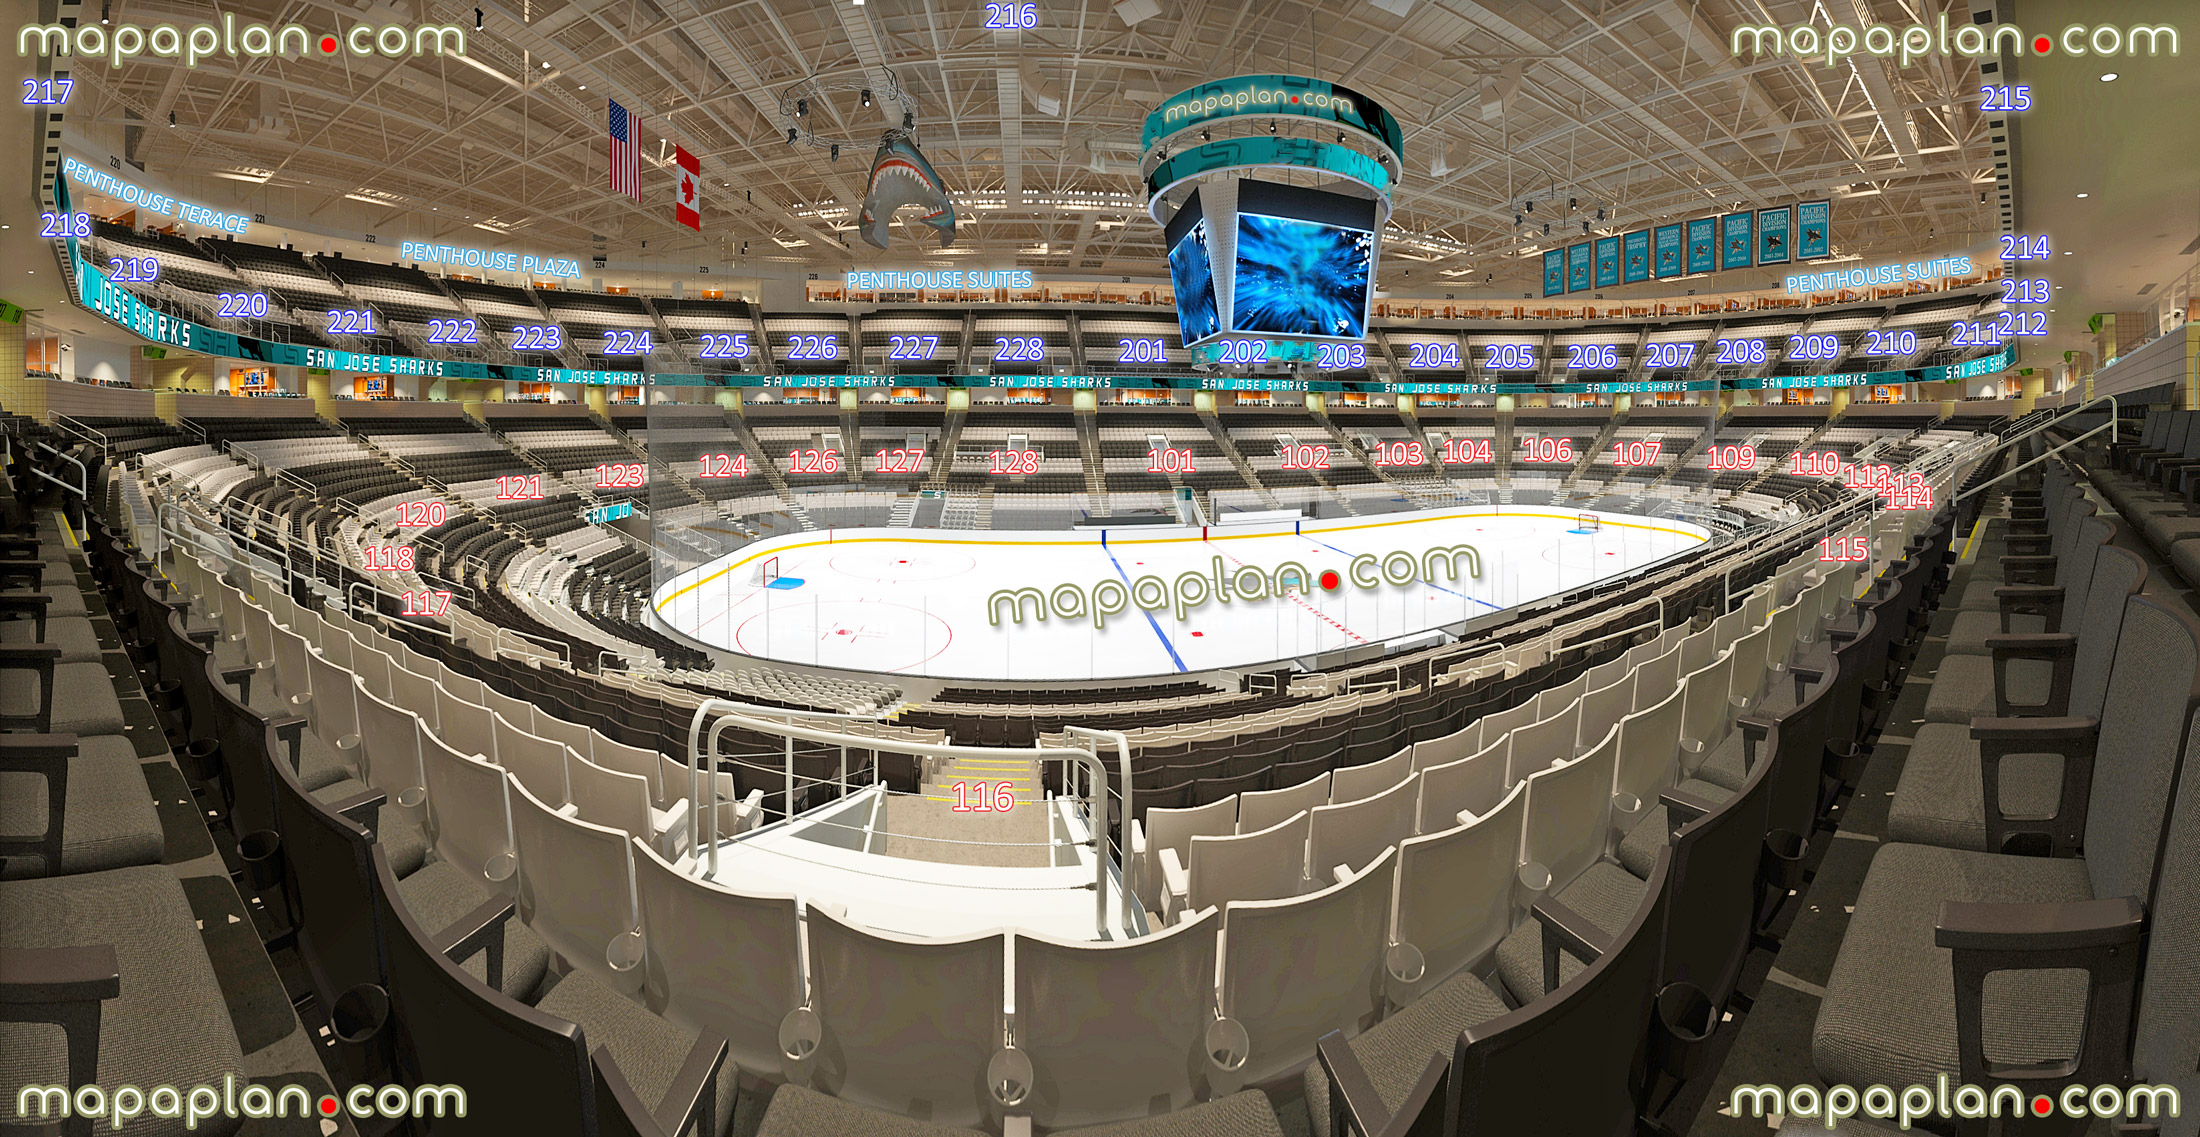 view section 120 row 12 seat 1 san jose sharks nhl barracuda ahl ice hockey game panorama club level 100 200 vip suite boxes premium suites sections 201 202 203 204 205 206 207 208 209 210 211 212 213 214 215 216 217 218 219 220 221 222 223 224 225 226 227 228 San Jose SAP Center seating chart